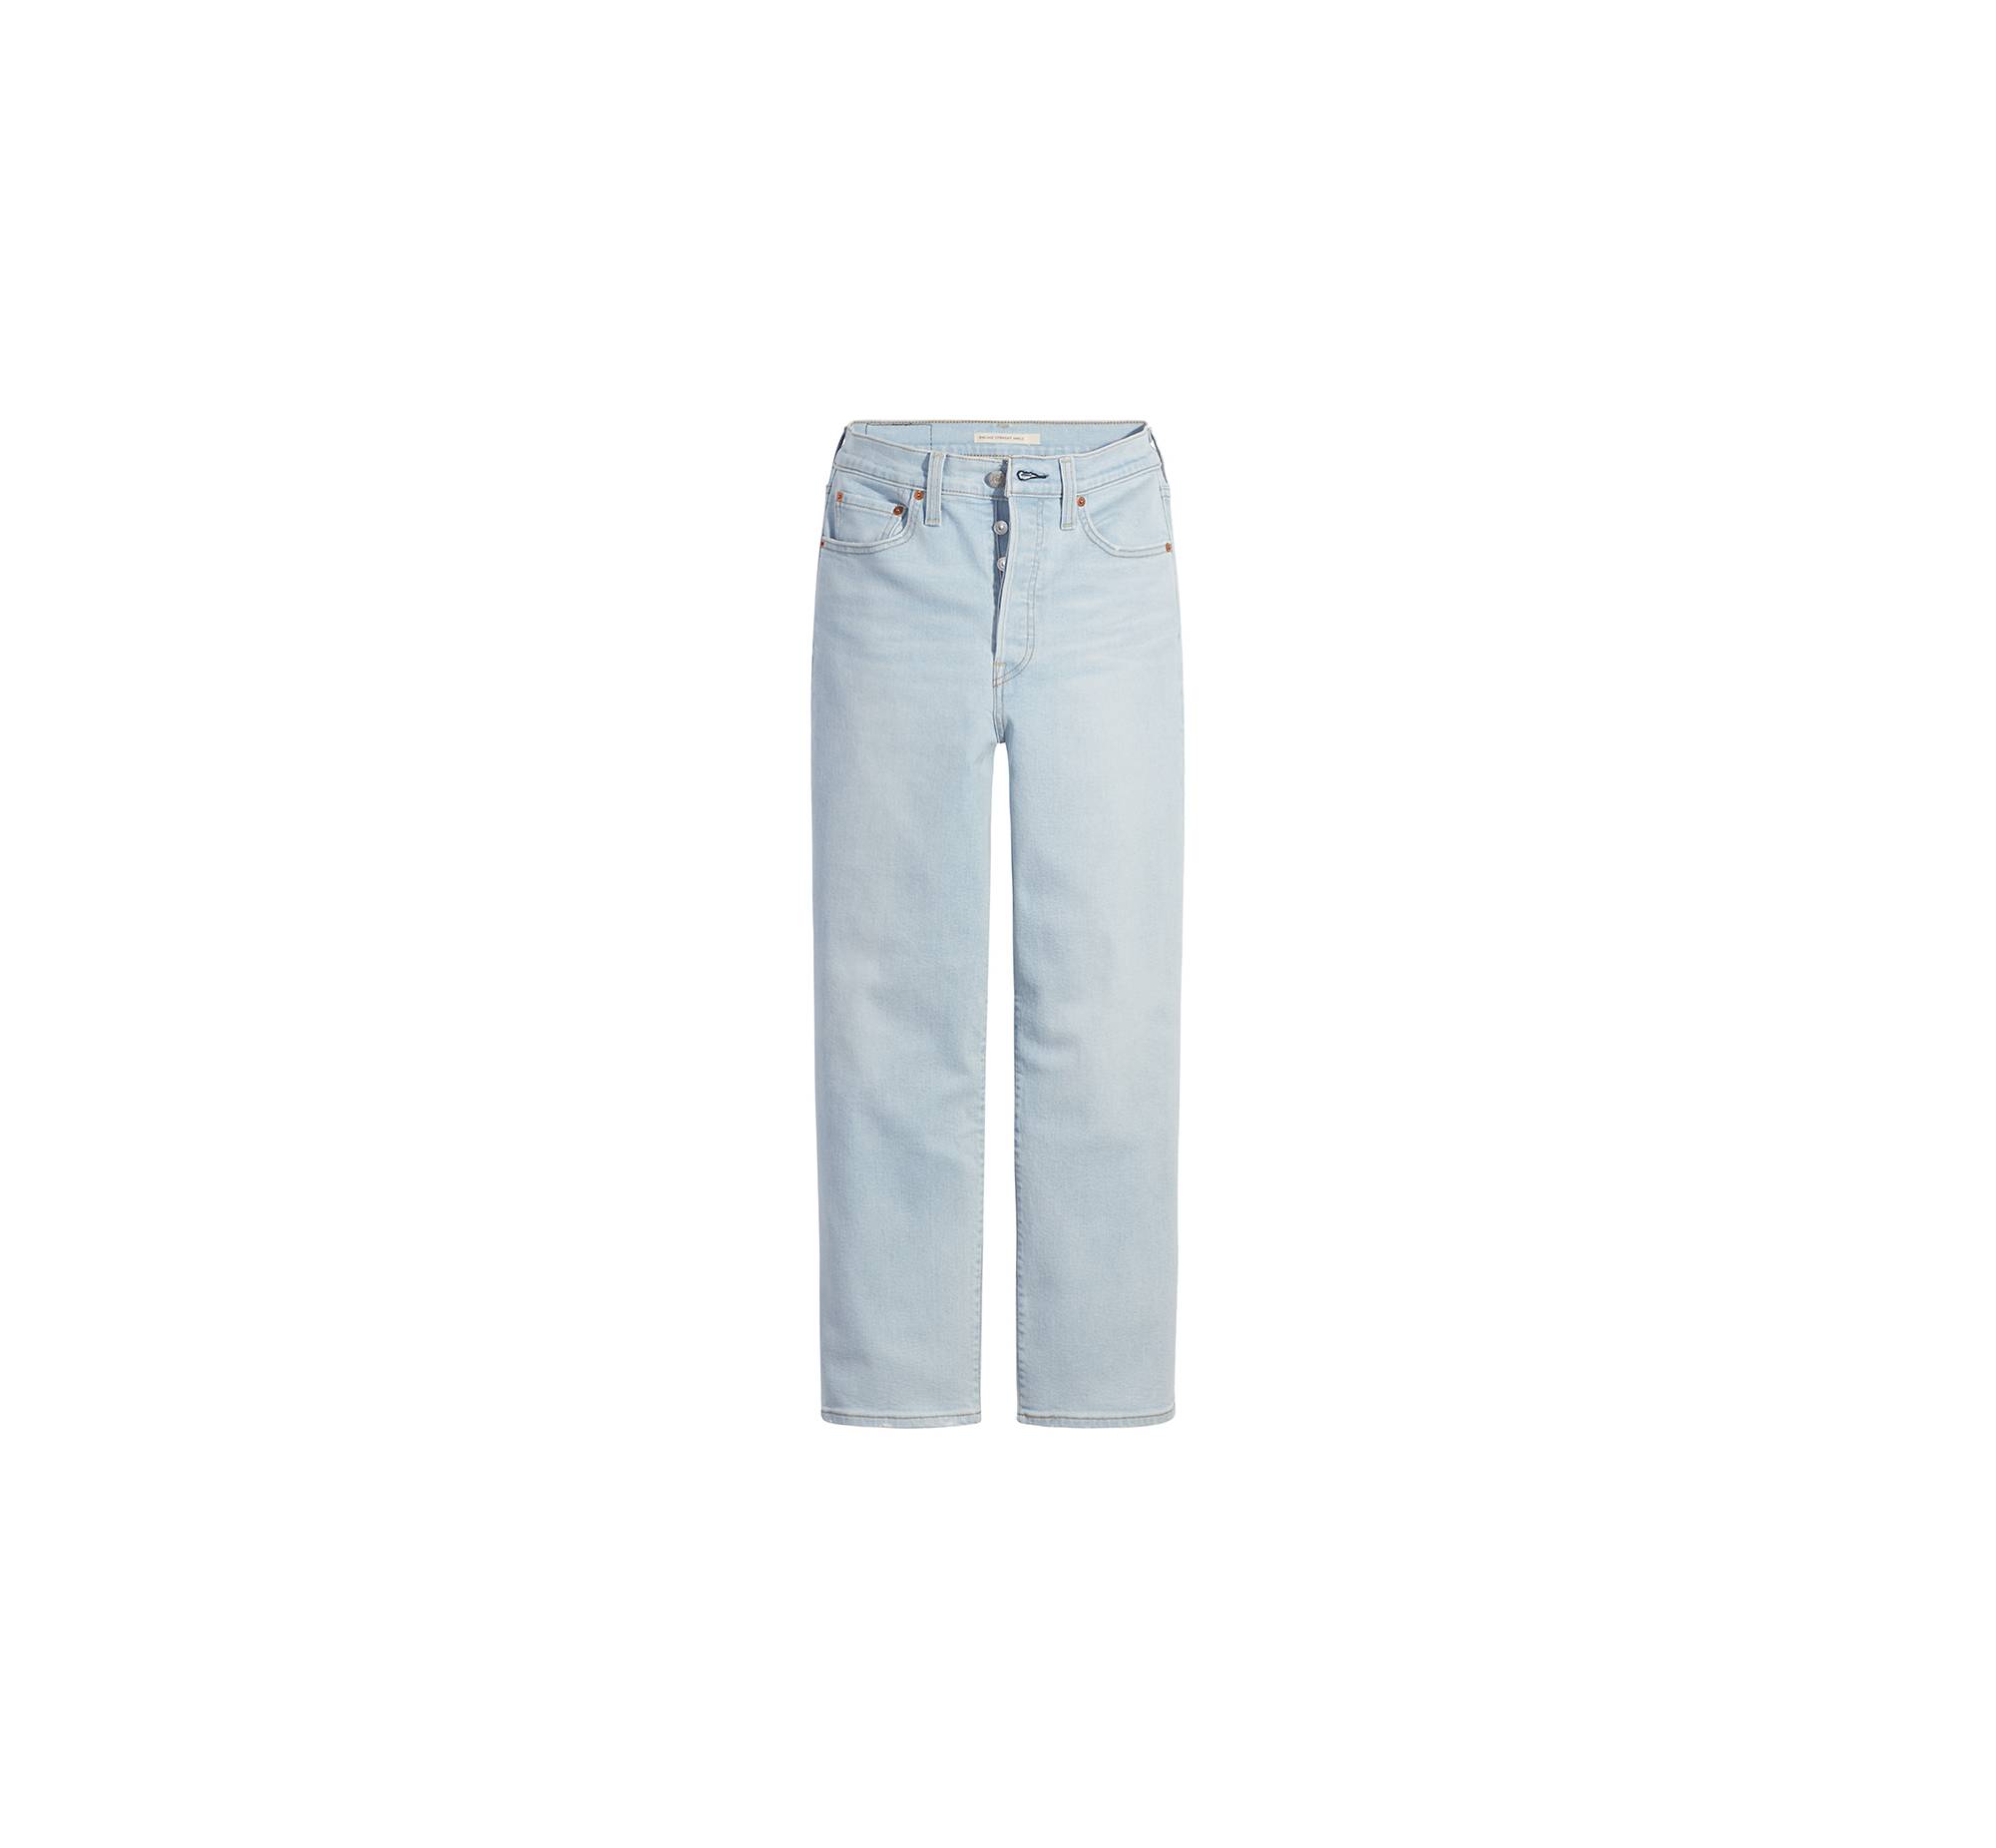 Buy Bleach Denim Button Front Wide Ankle Leg Jeans from Next Luxembourg